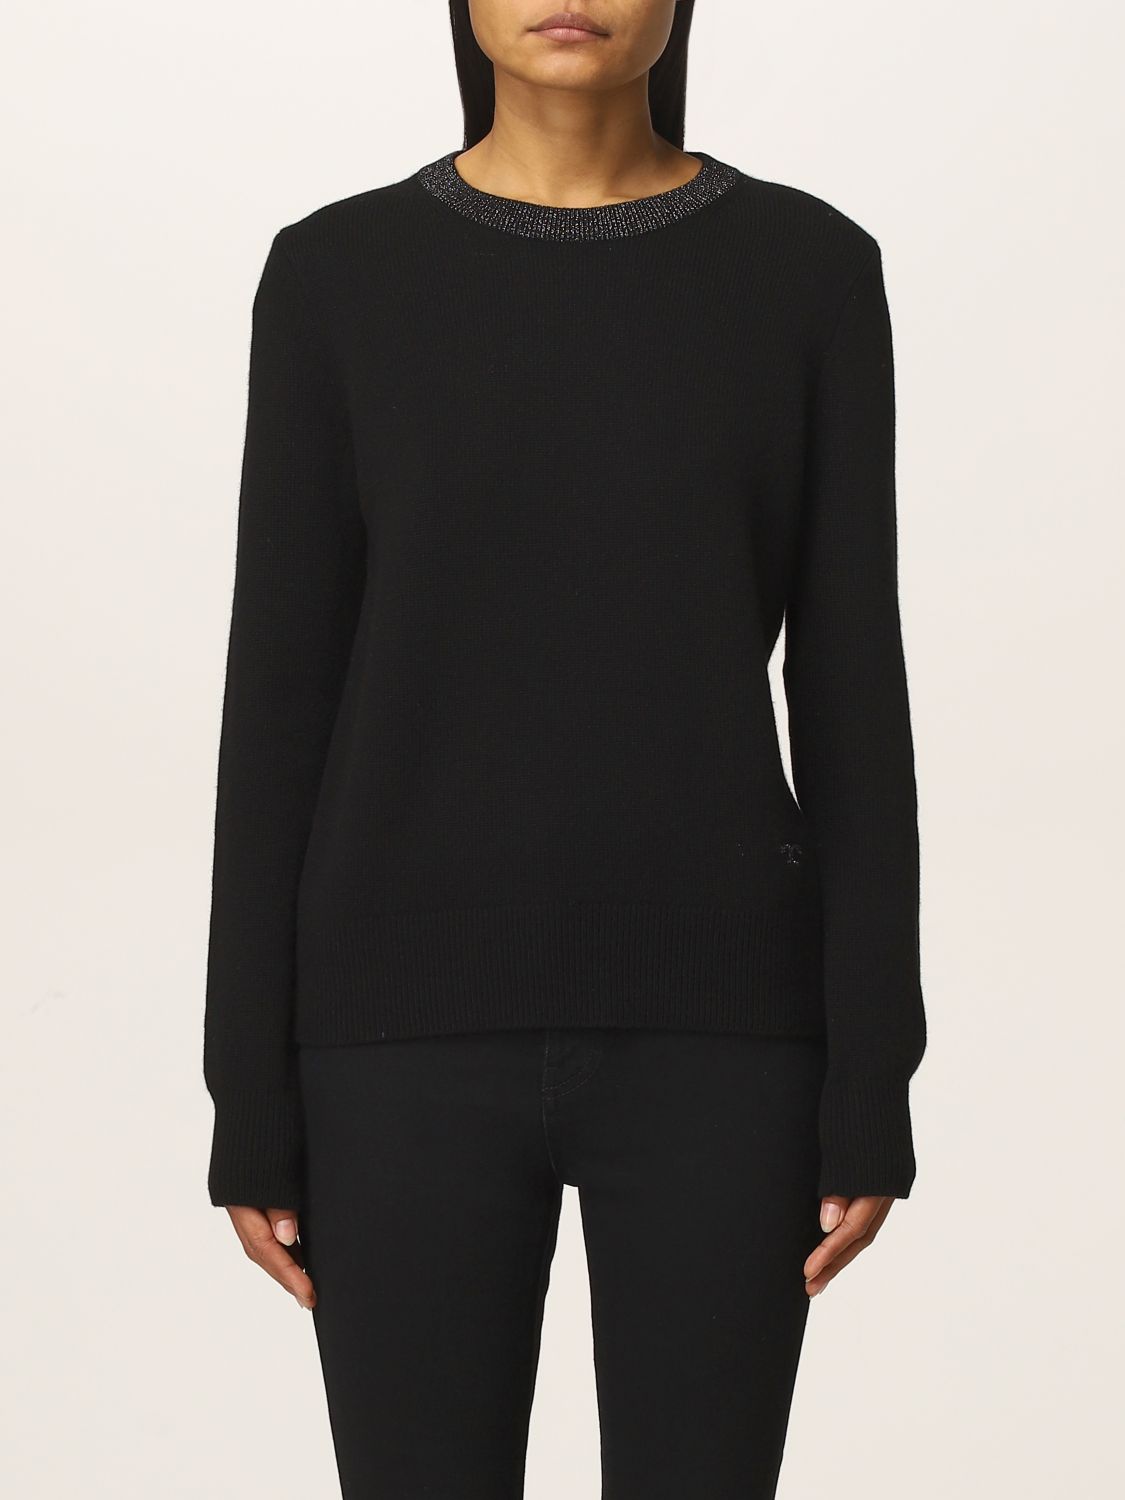 TORY BURCH: sweater for woman - Black | Tory Burch sweater 86643 online on  